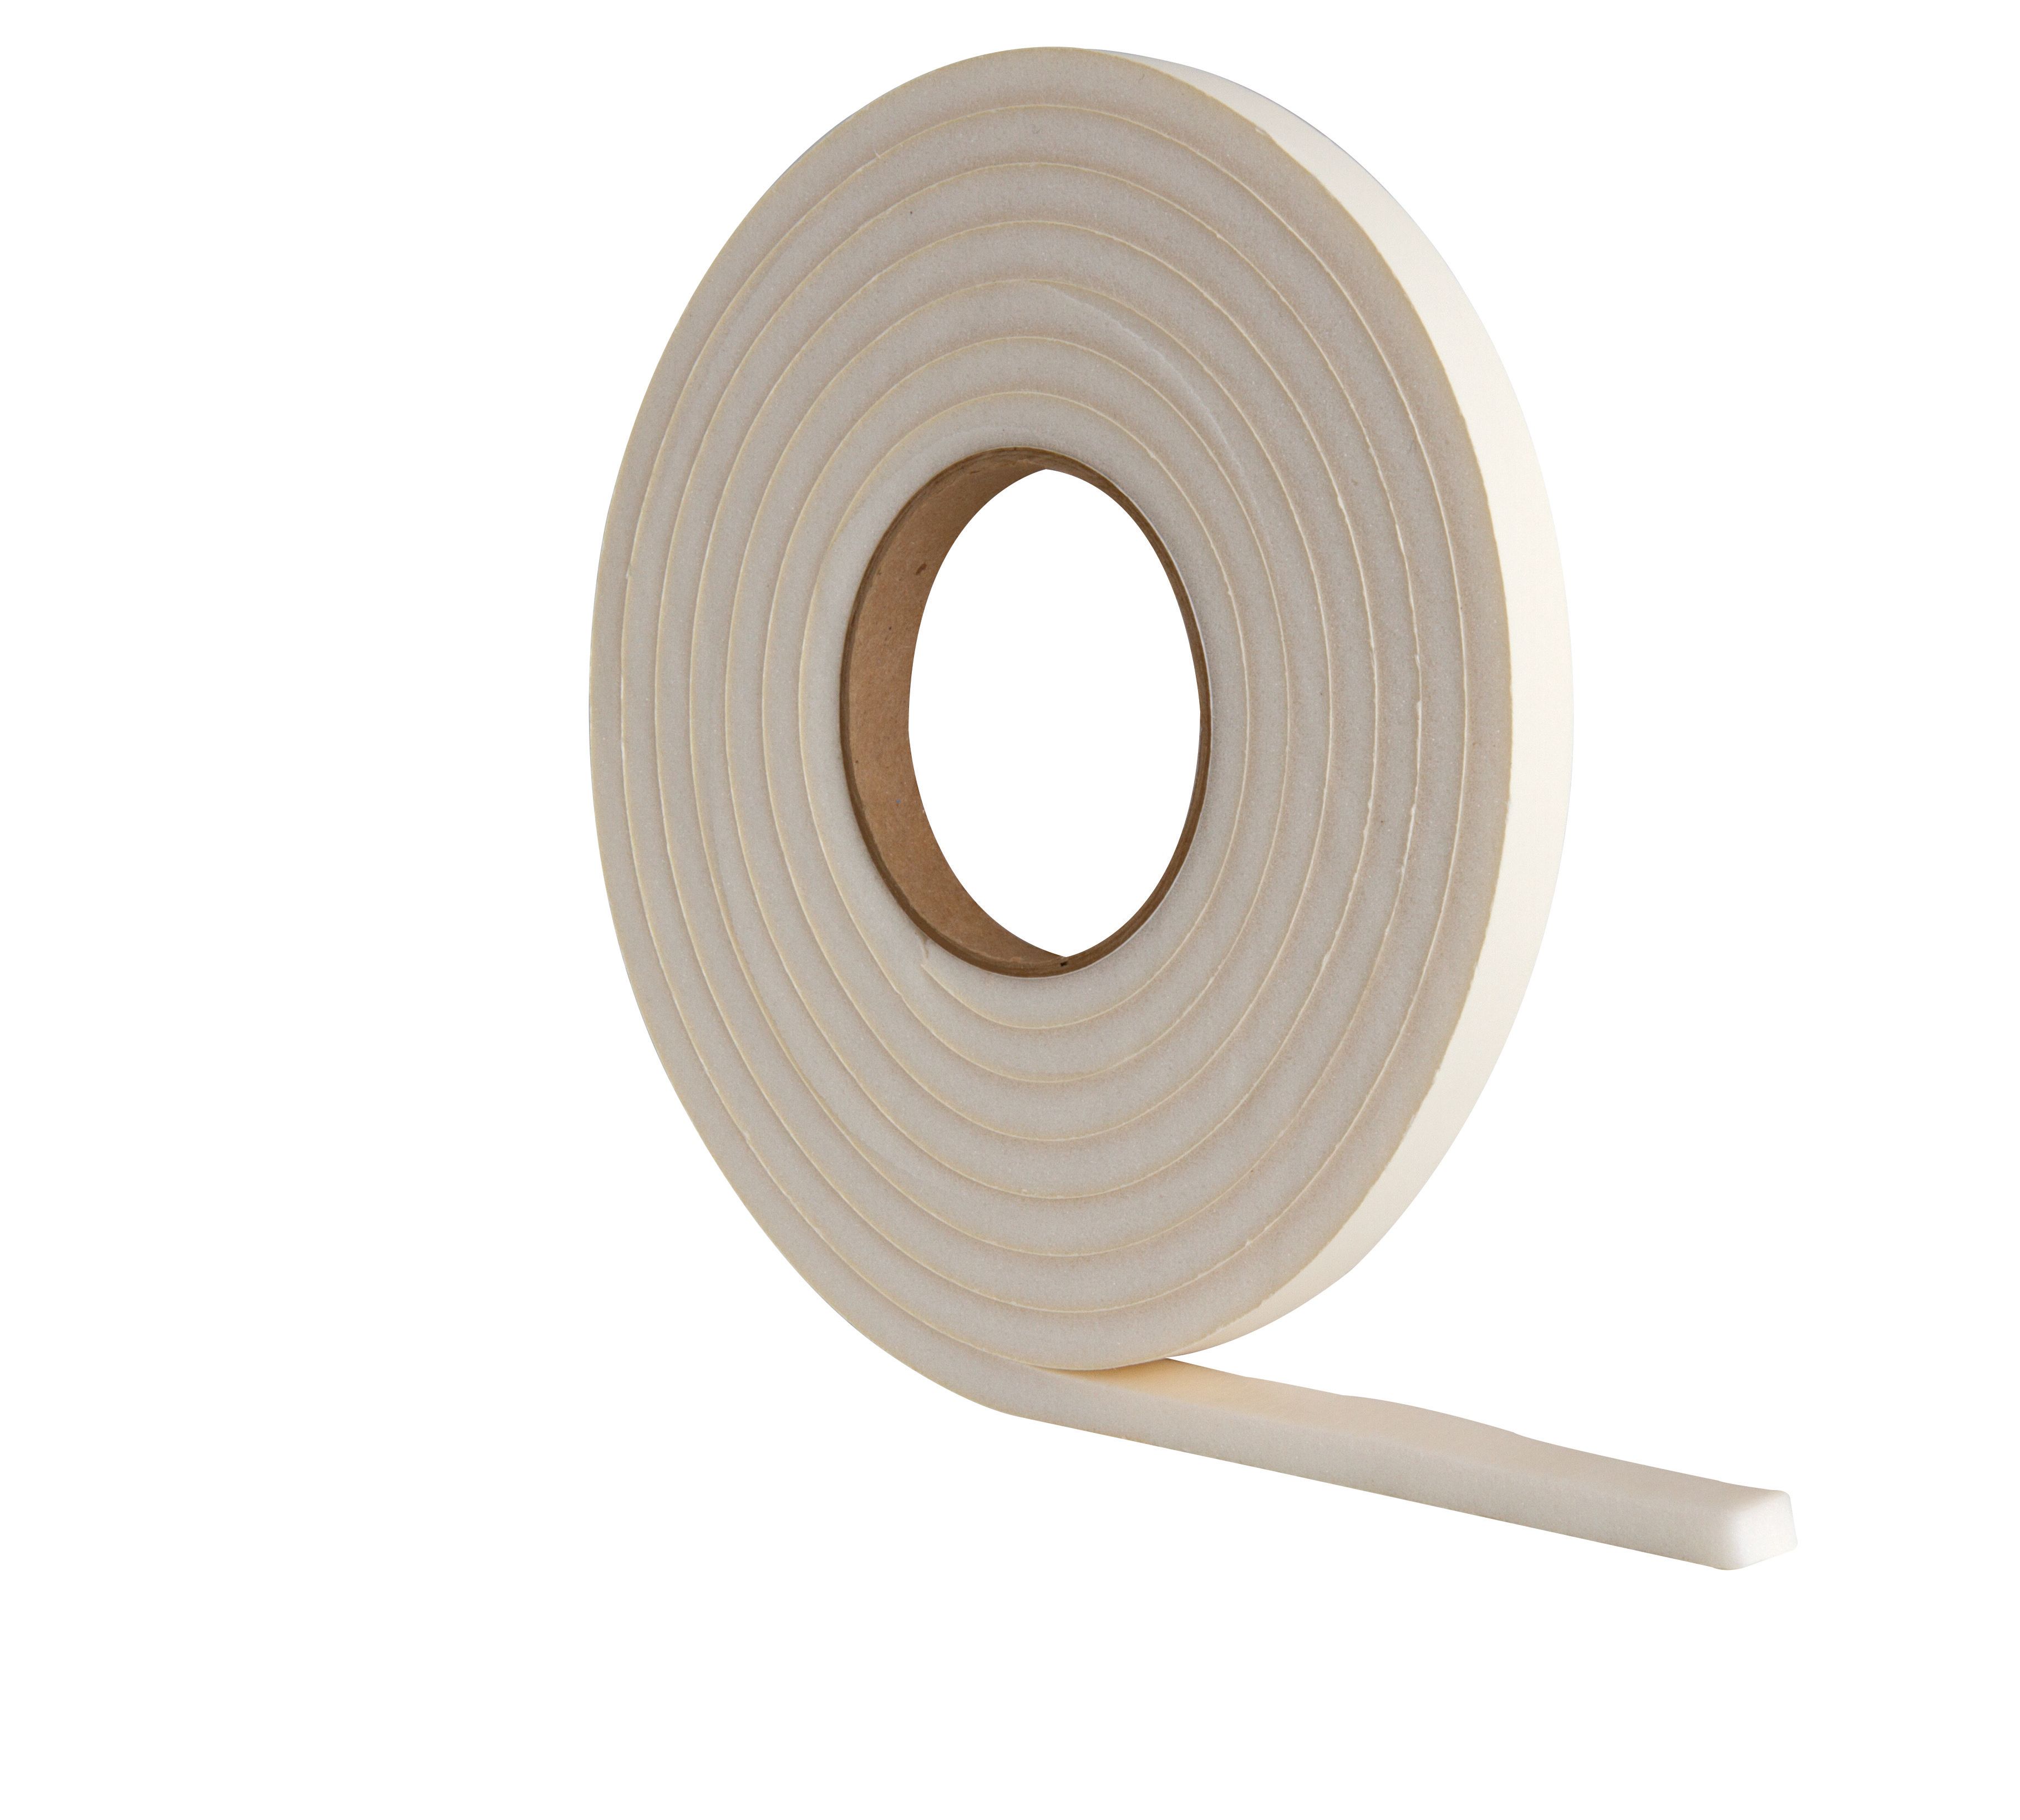 Wickes 3.5m Extra Thick Draught Seal - White